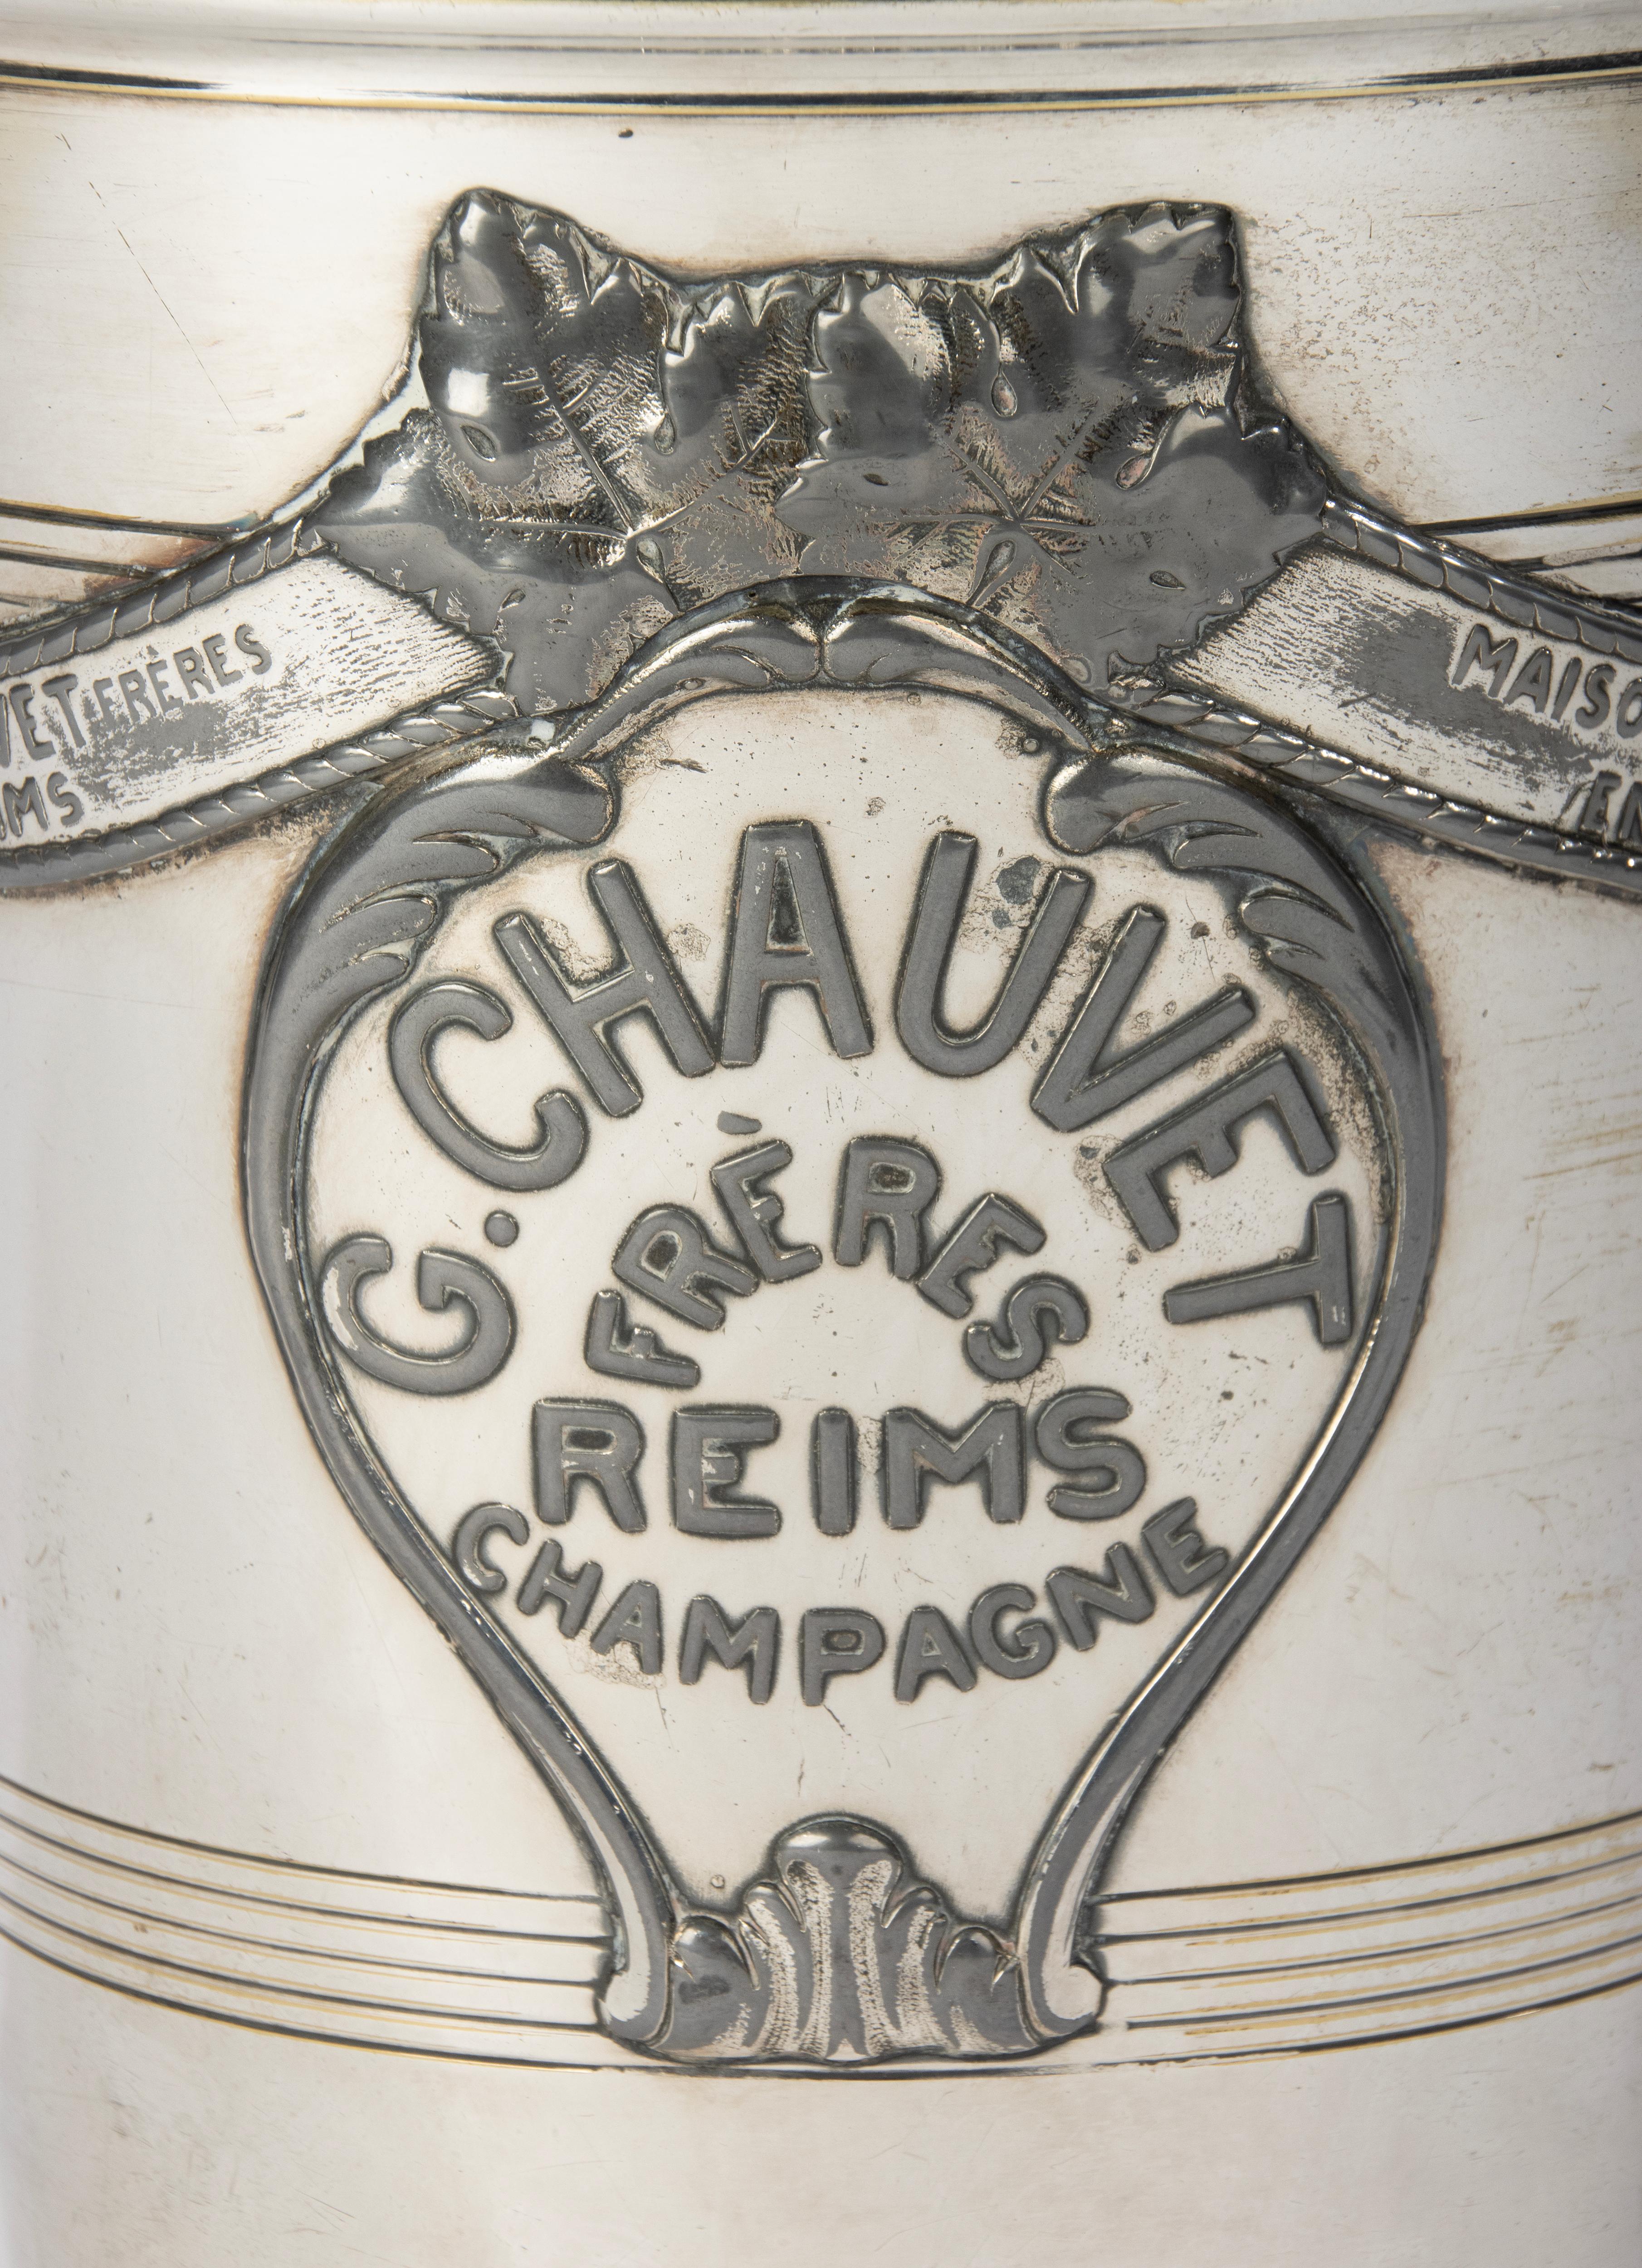 Hand-Crafted Antique Silver-Plated Champagne Cooler - Agit Paris for Maison G. Chauvet Reims For Sale